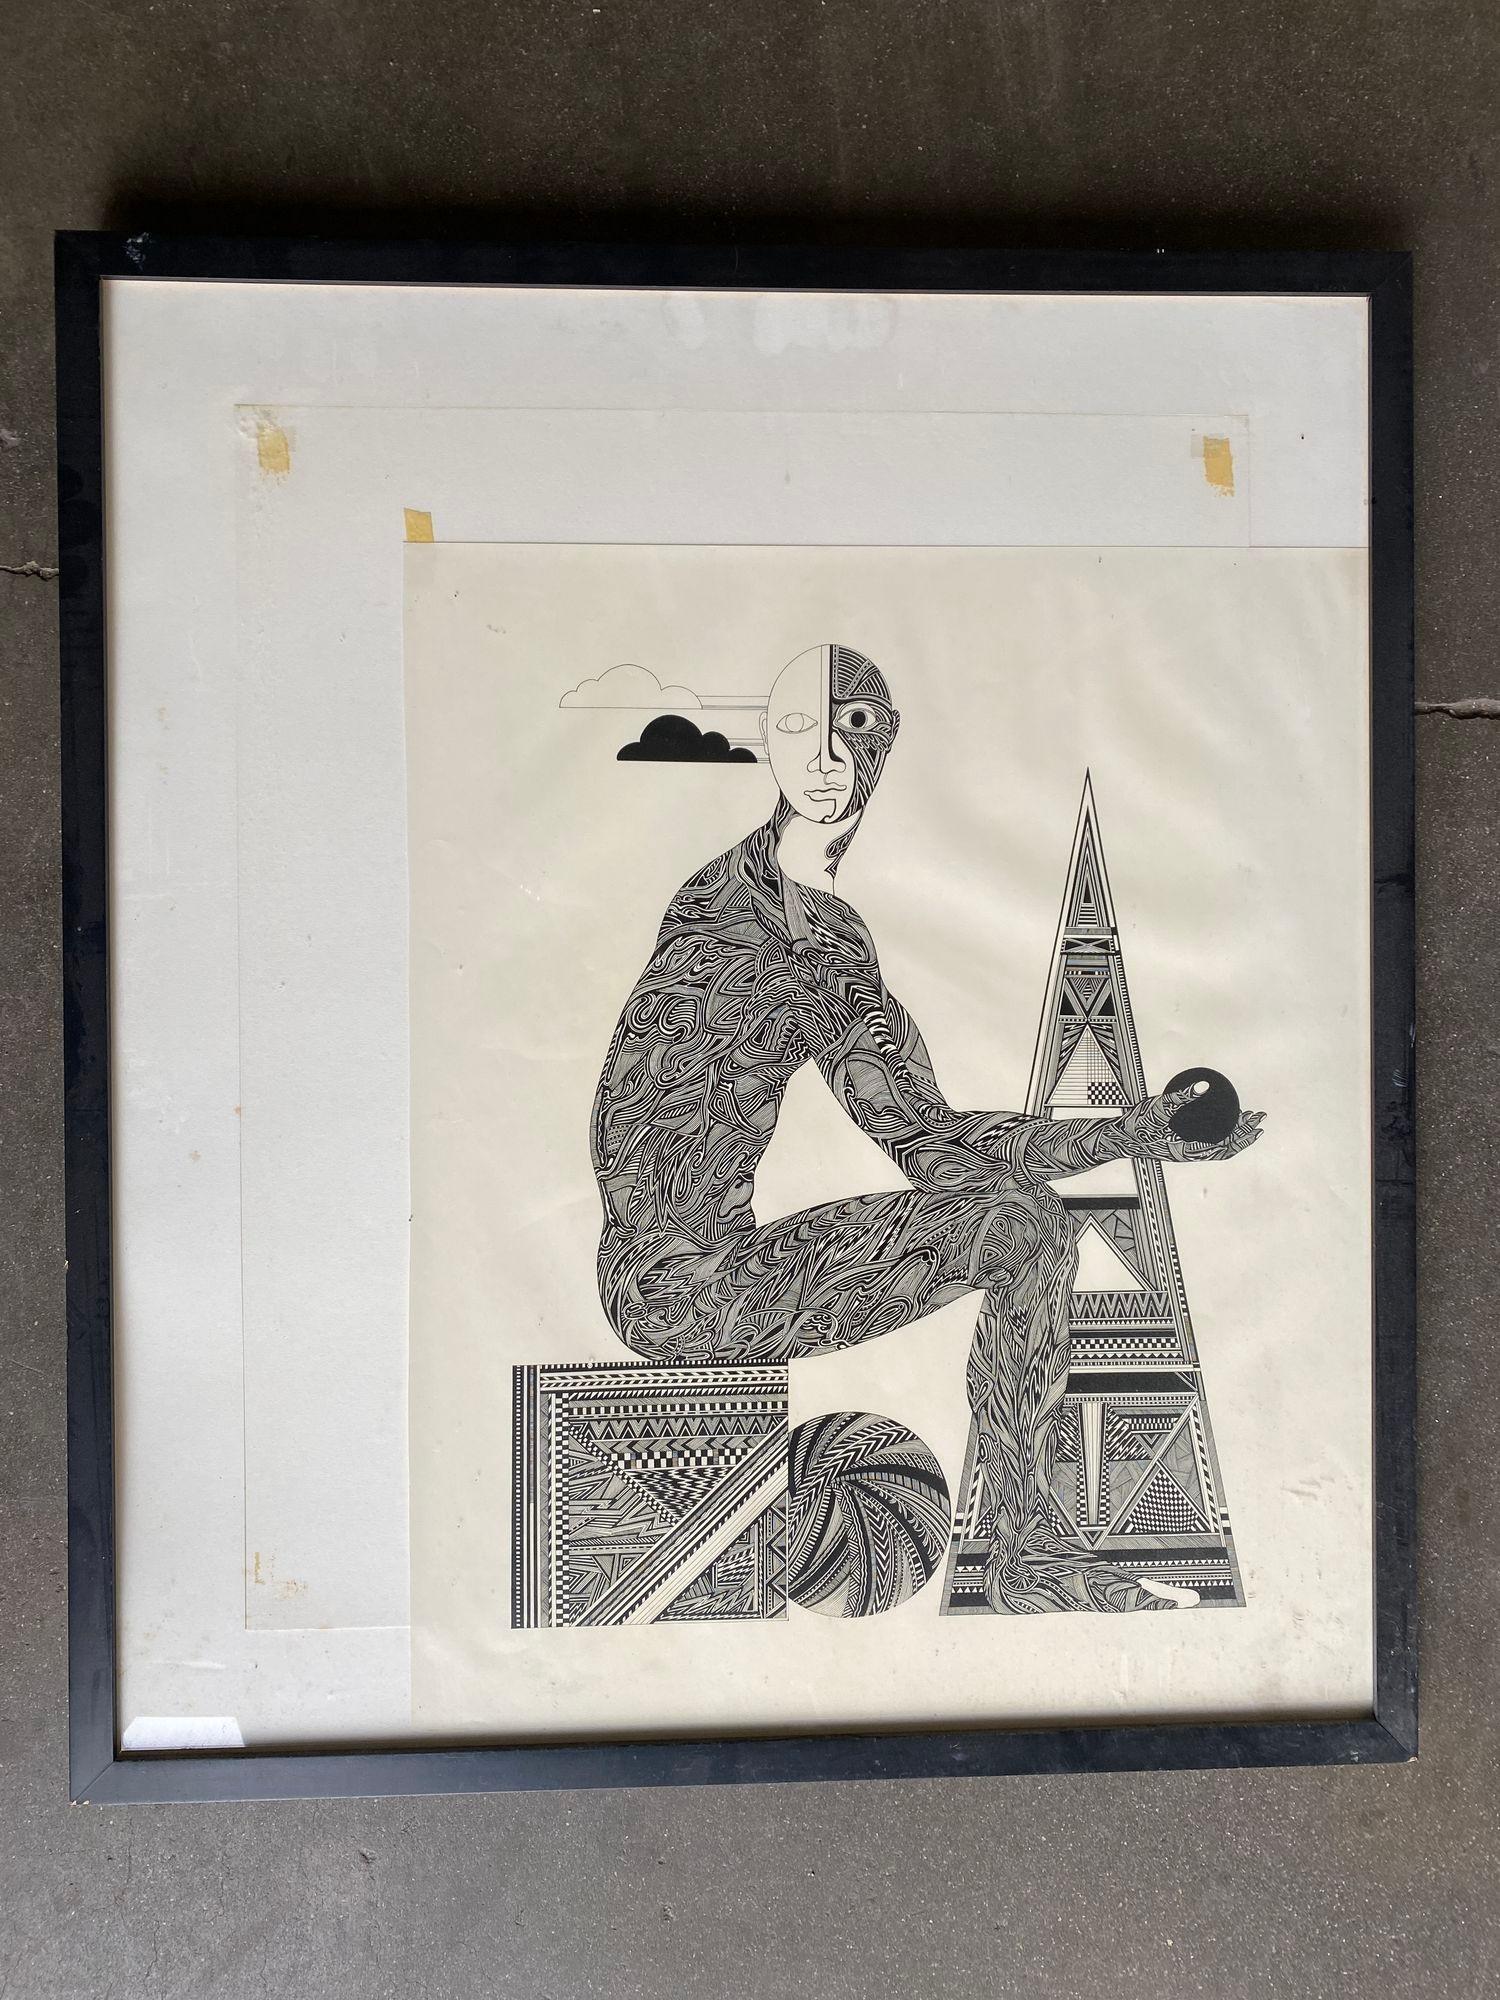 Hand Inked artwork on Paper Surrealist Male Portrait Etching Signed Kea Kreel 1989.

Kenneth Kreel was born on 1 July 1941 in Evansville, Indiana, USA. He was an actor, known for Nicole (1976). He was known as a Professional Antique Dealer, Ballet